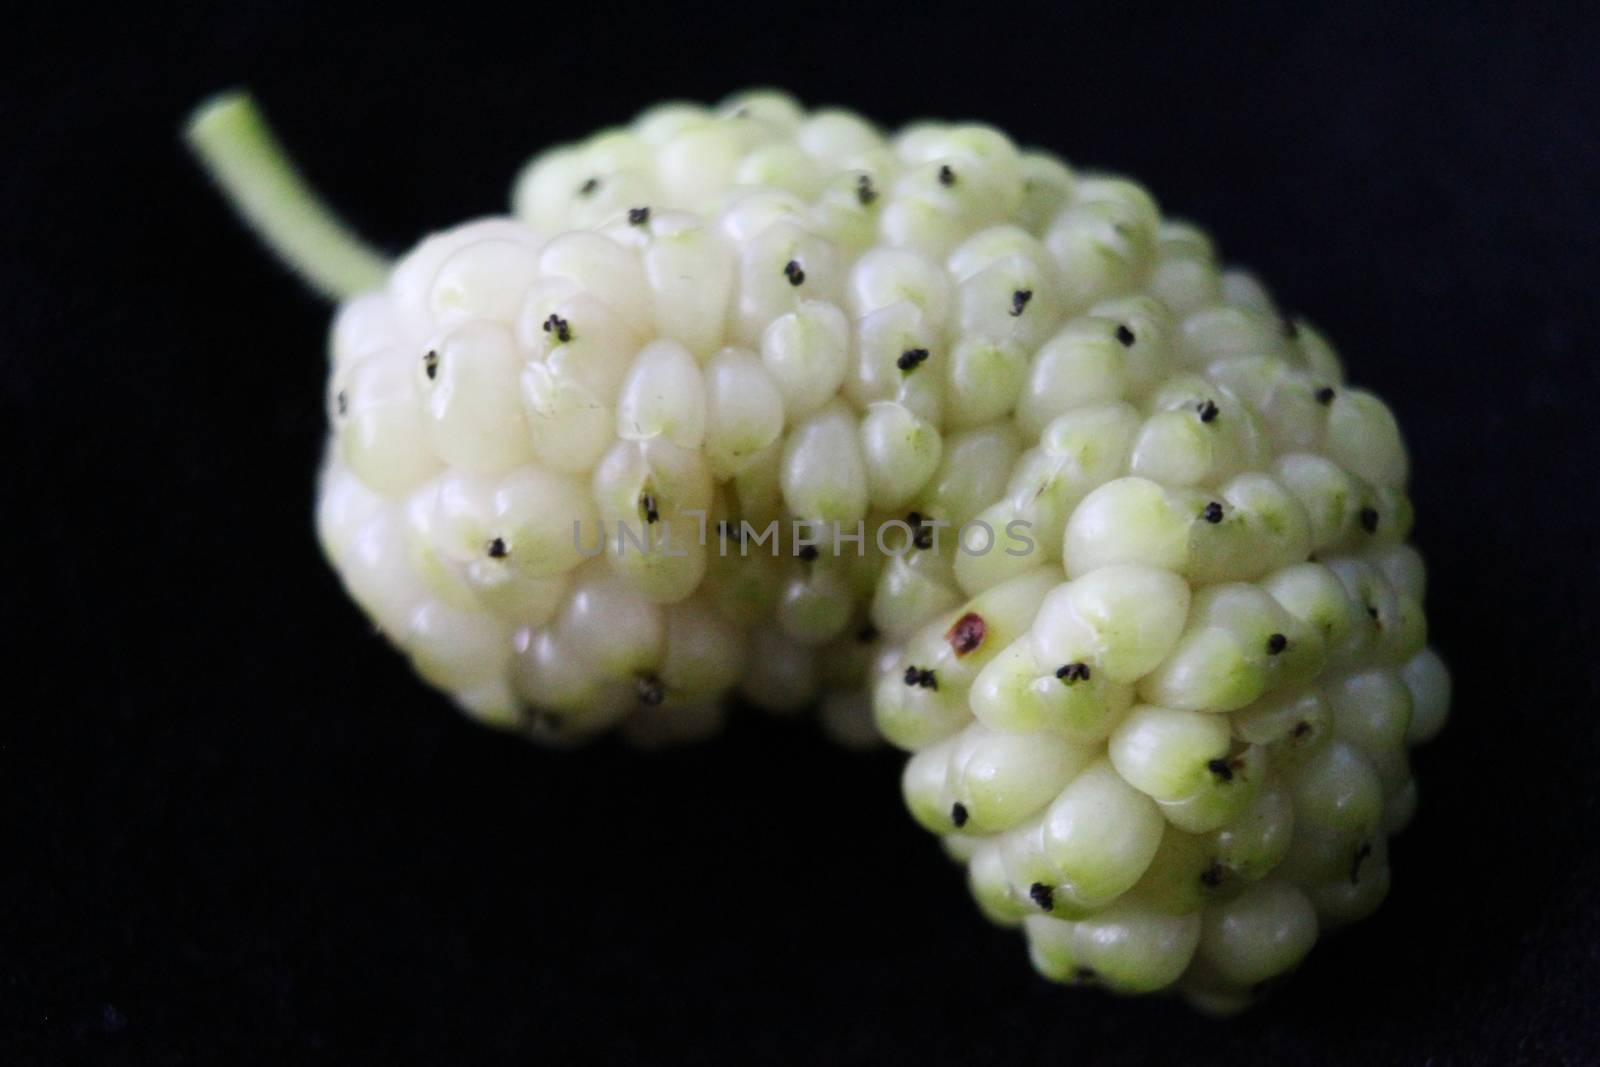 Macro of white mulberry fruit with details. Morus alba, white mulberry. On a black background.